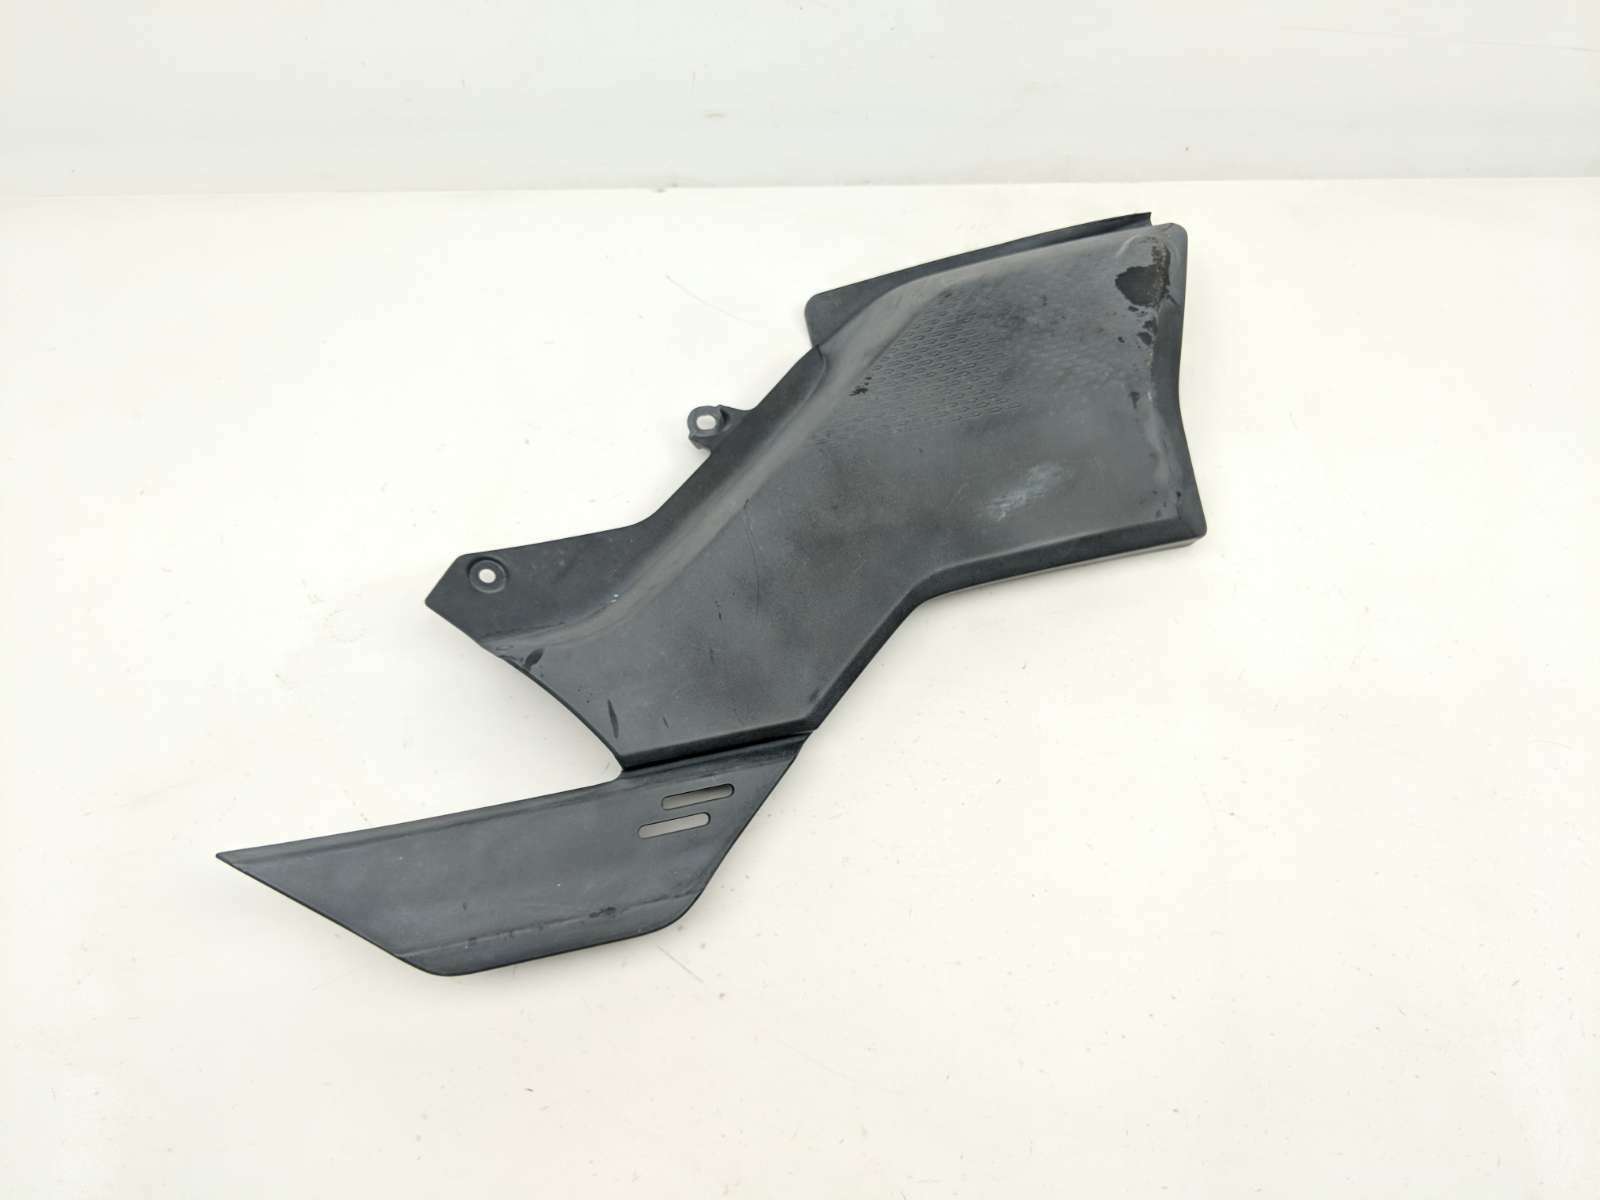 14 Honda CTX1300A CTX 1300 Right Mid Side Fairing Cover Panel 83510-MJN-A000